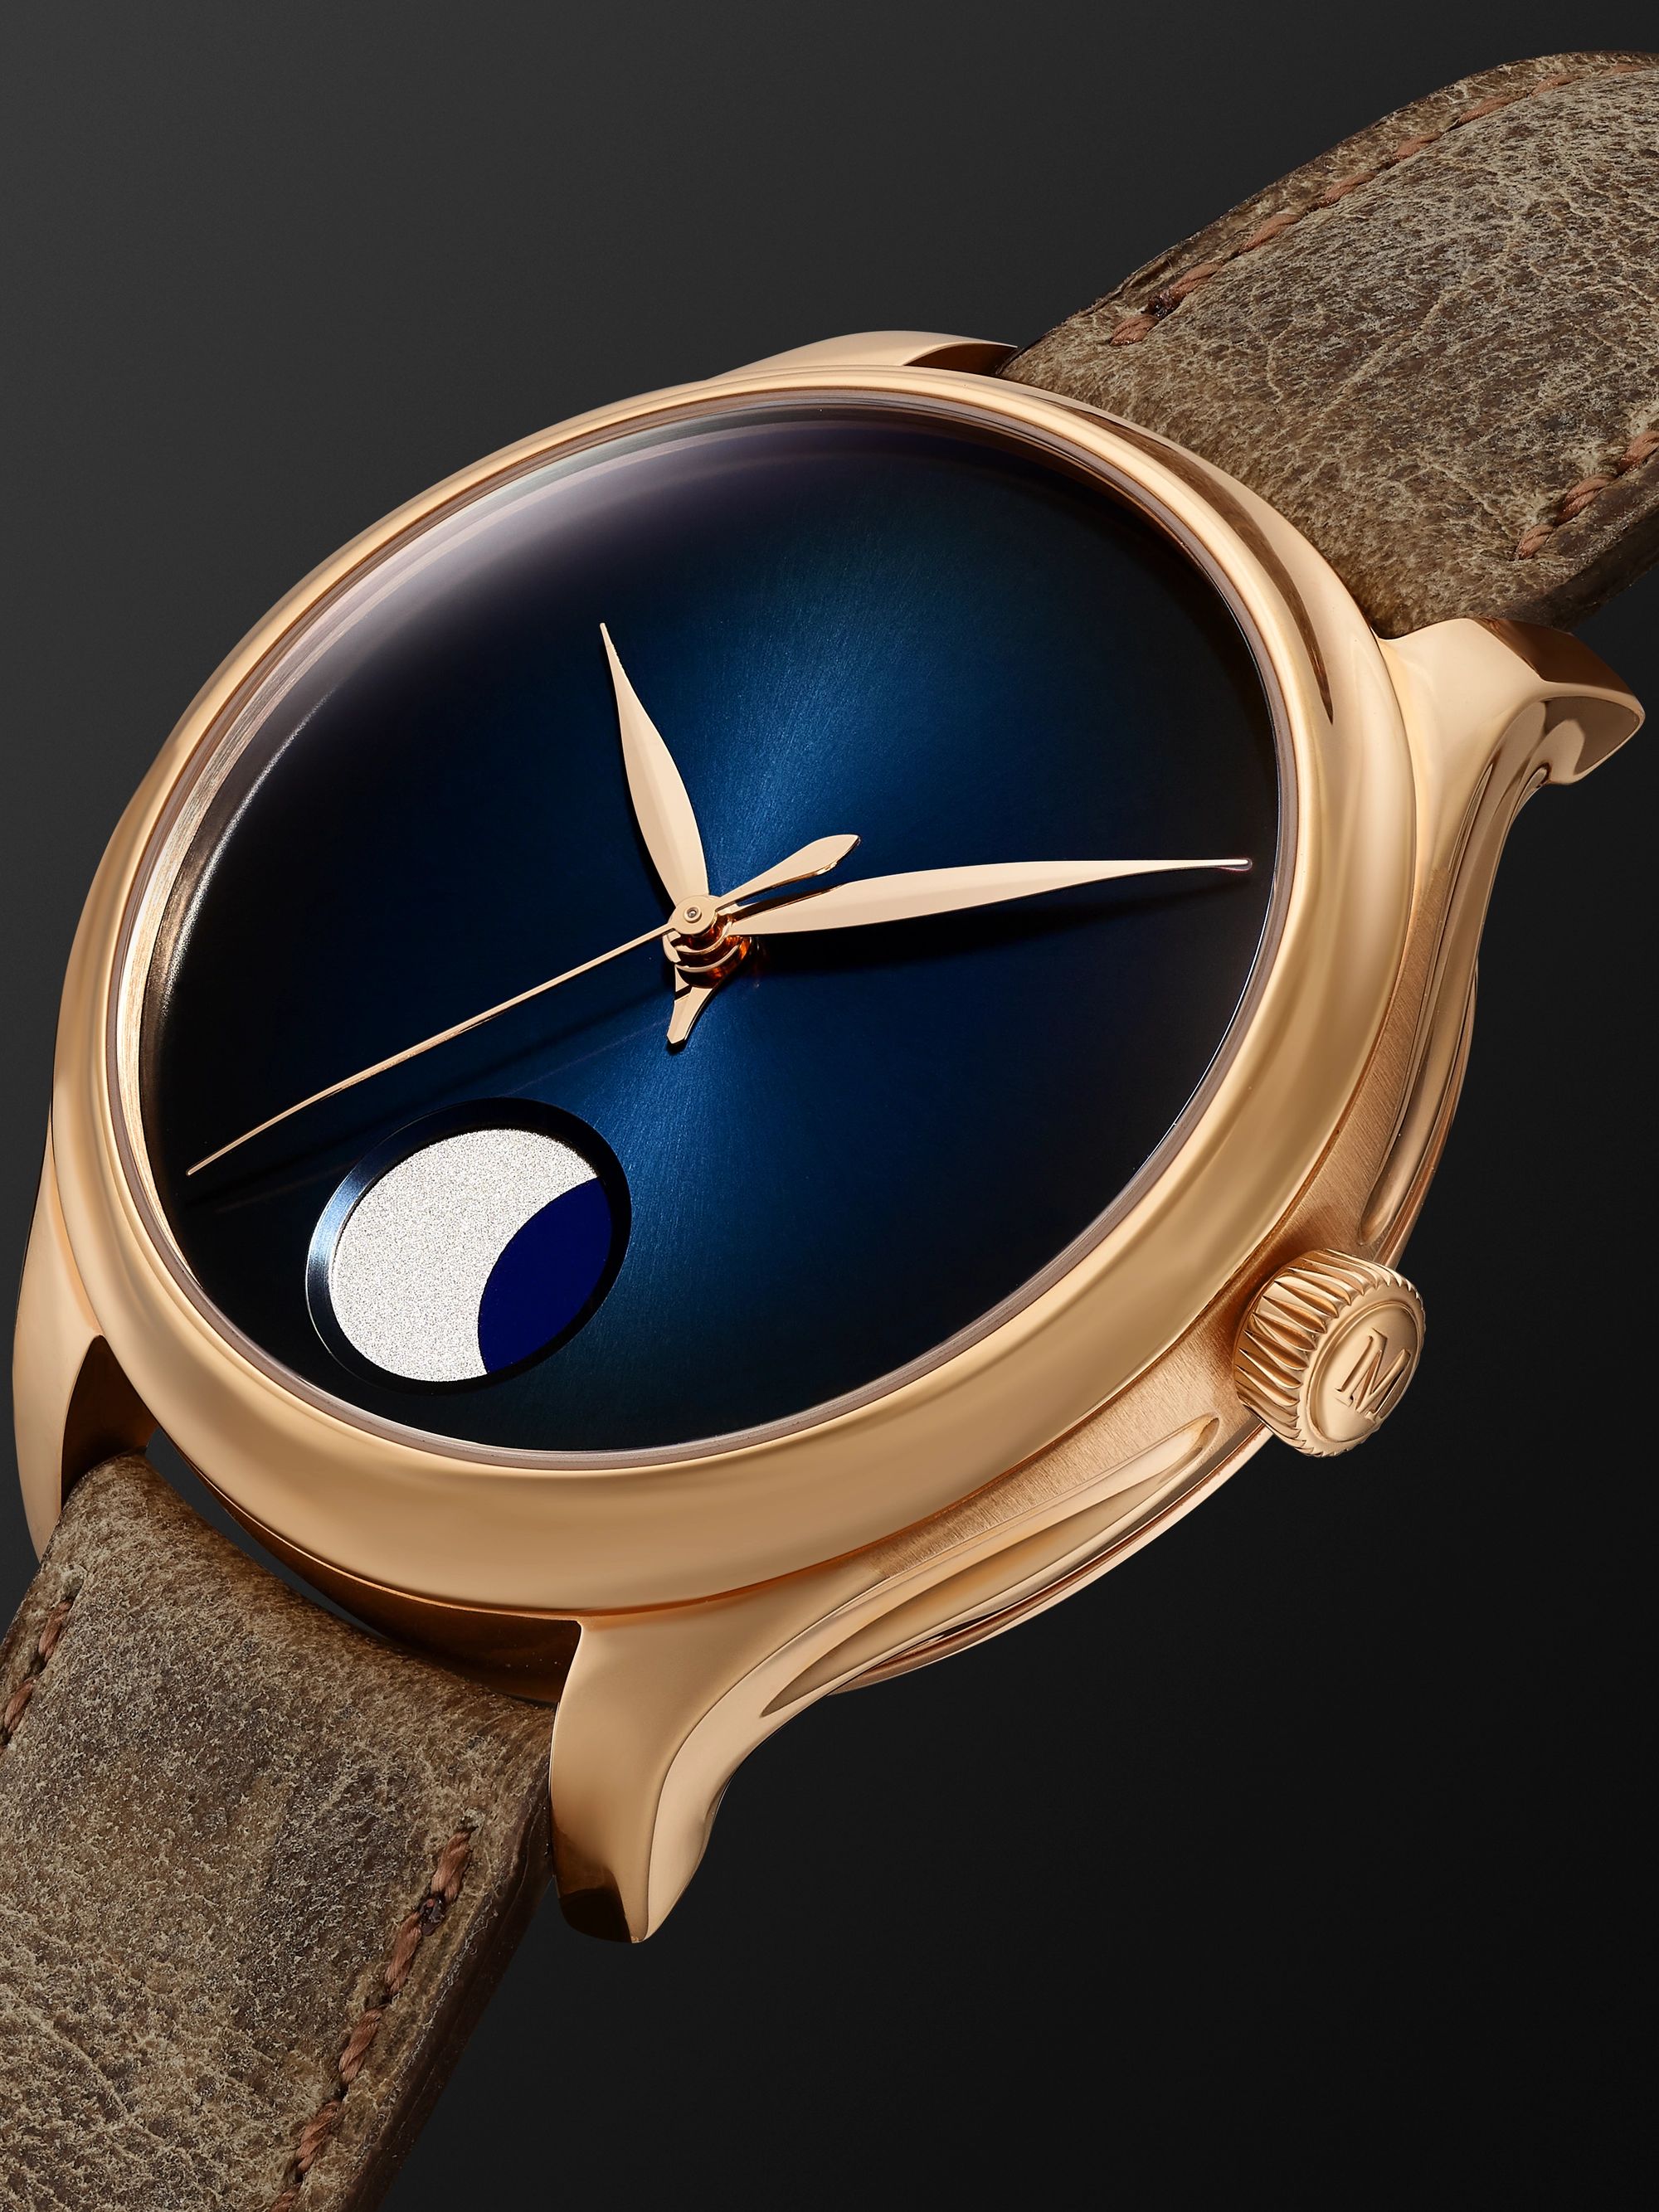 H. MOSER & CIE. Endeavour Perpetual Moon Limited Edition Hand-Wound 42mm 18-Karat Red Gold and Leather Watch, Ref. No. 1801-0400